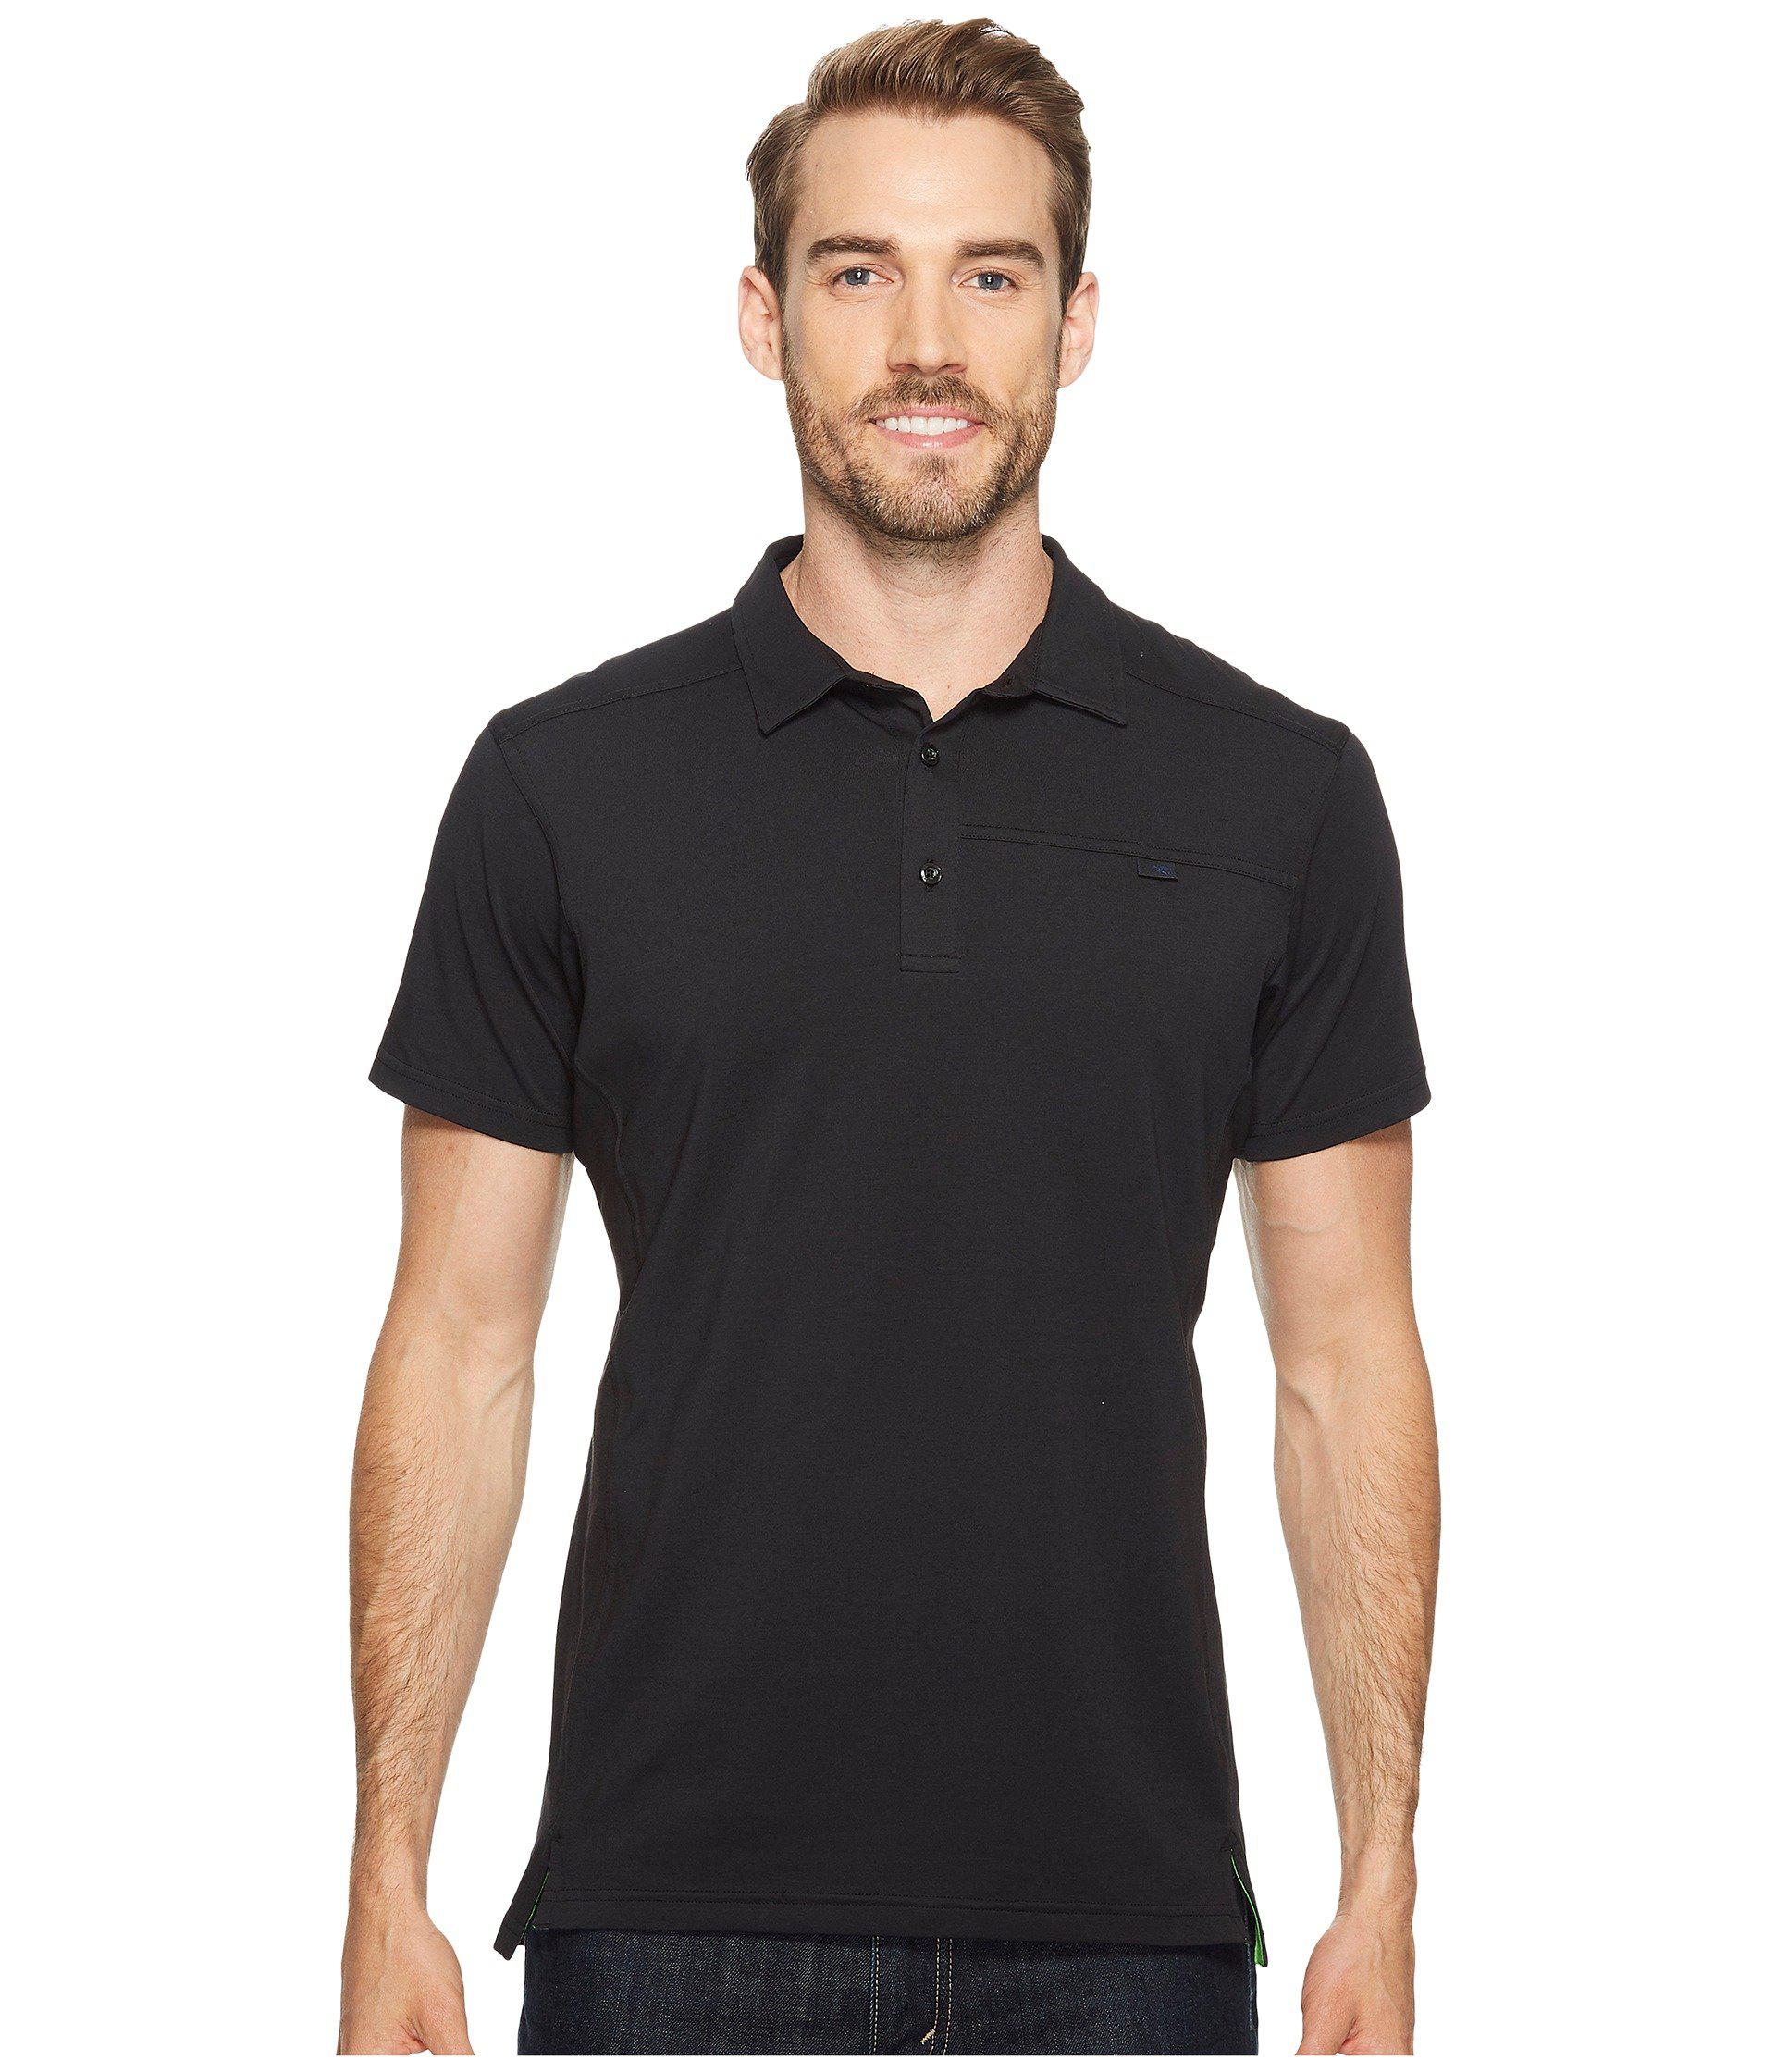 Arc'teryx Cotton Captive Polo S/s in Black for Men - Lyst